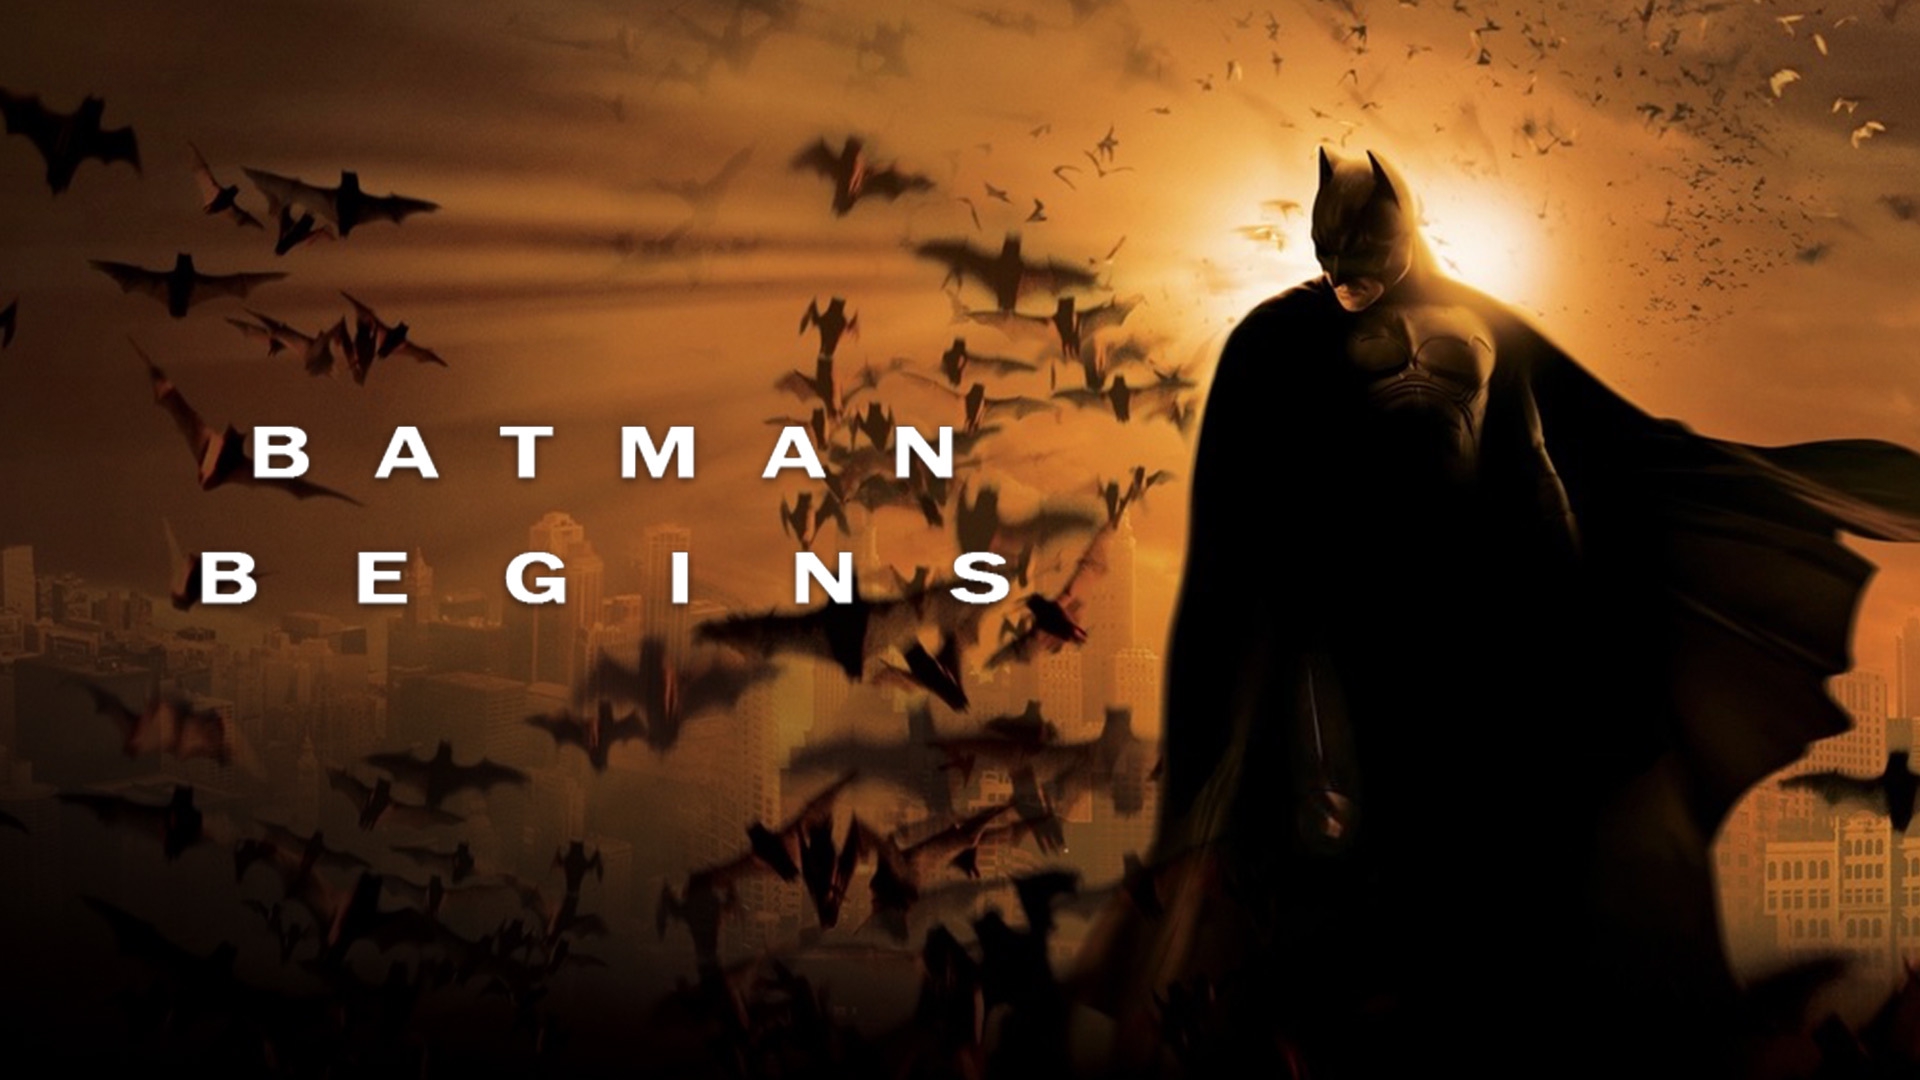 43-facts-about-the-movie-batman-begins